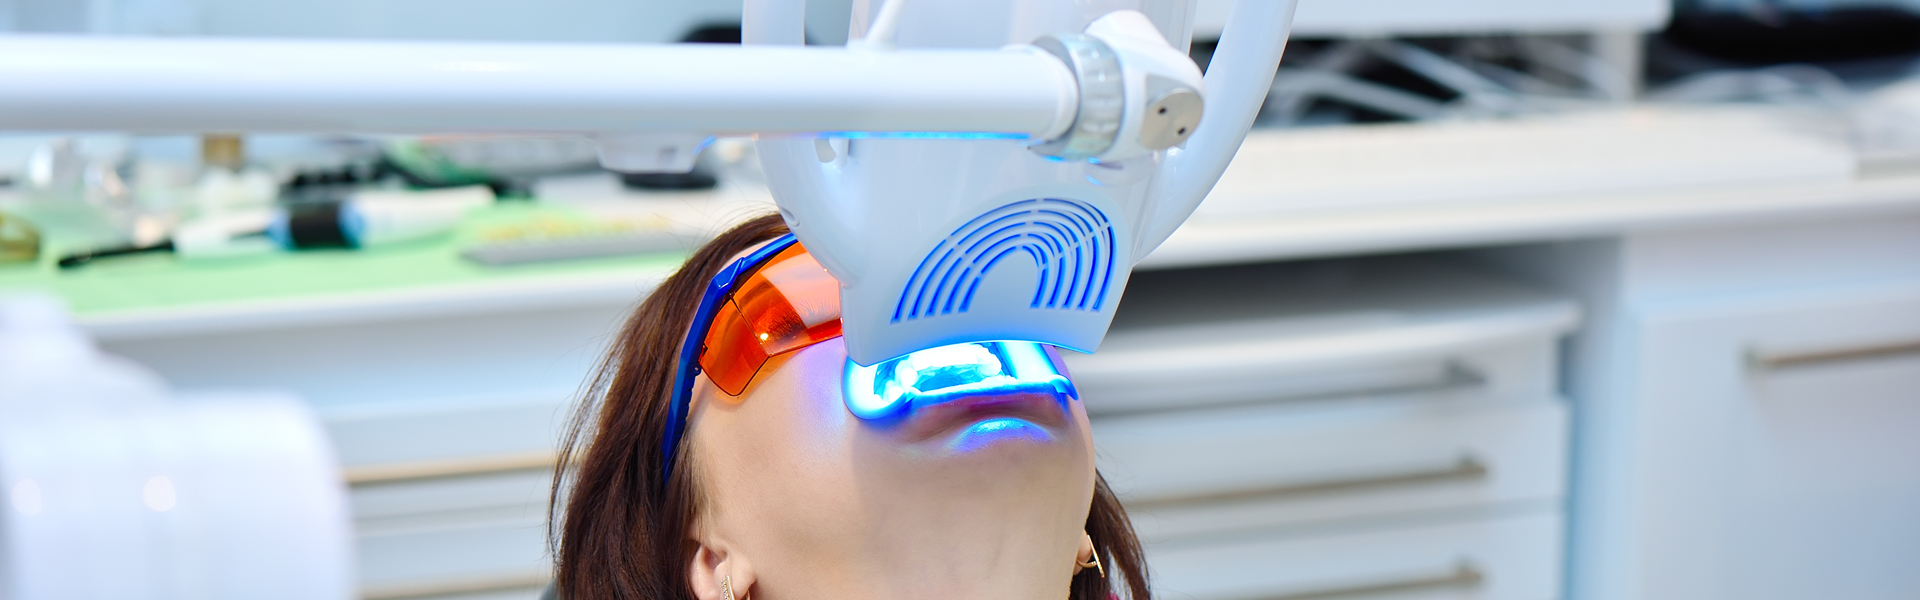 What Are The Types Of Laser Dentistry Procedures And Treatments?